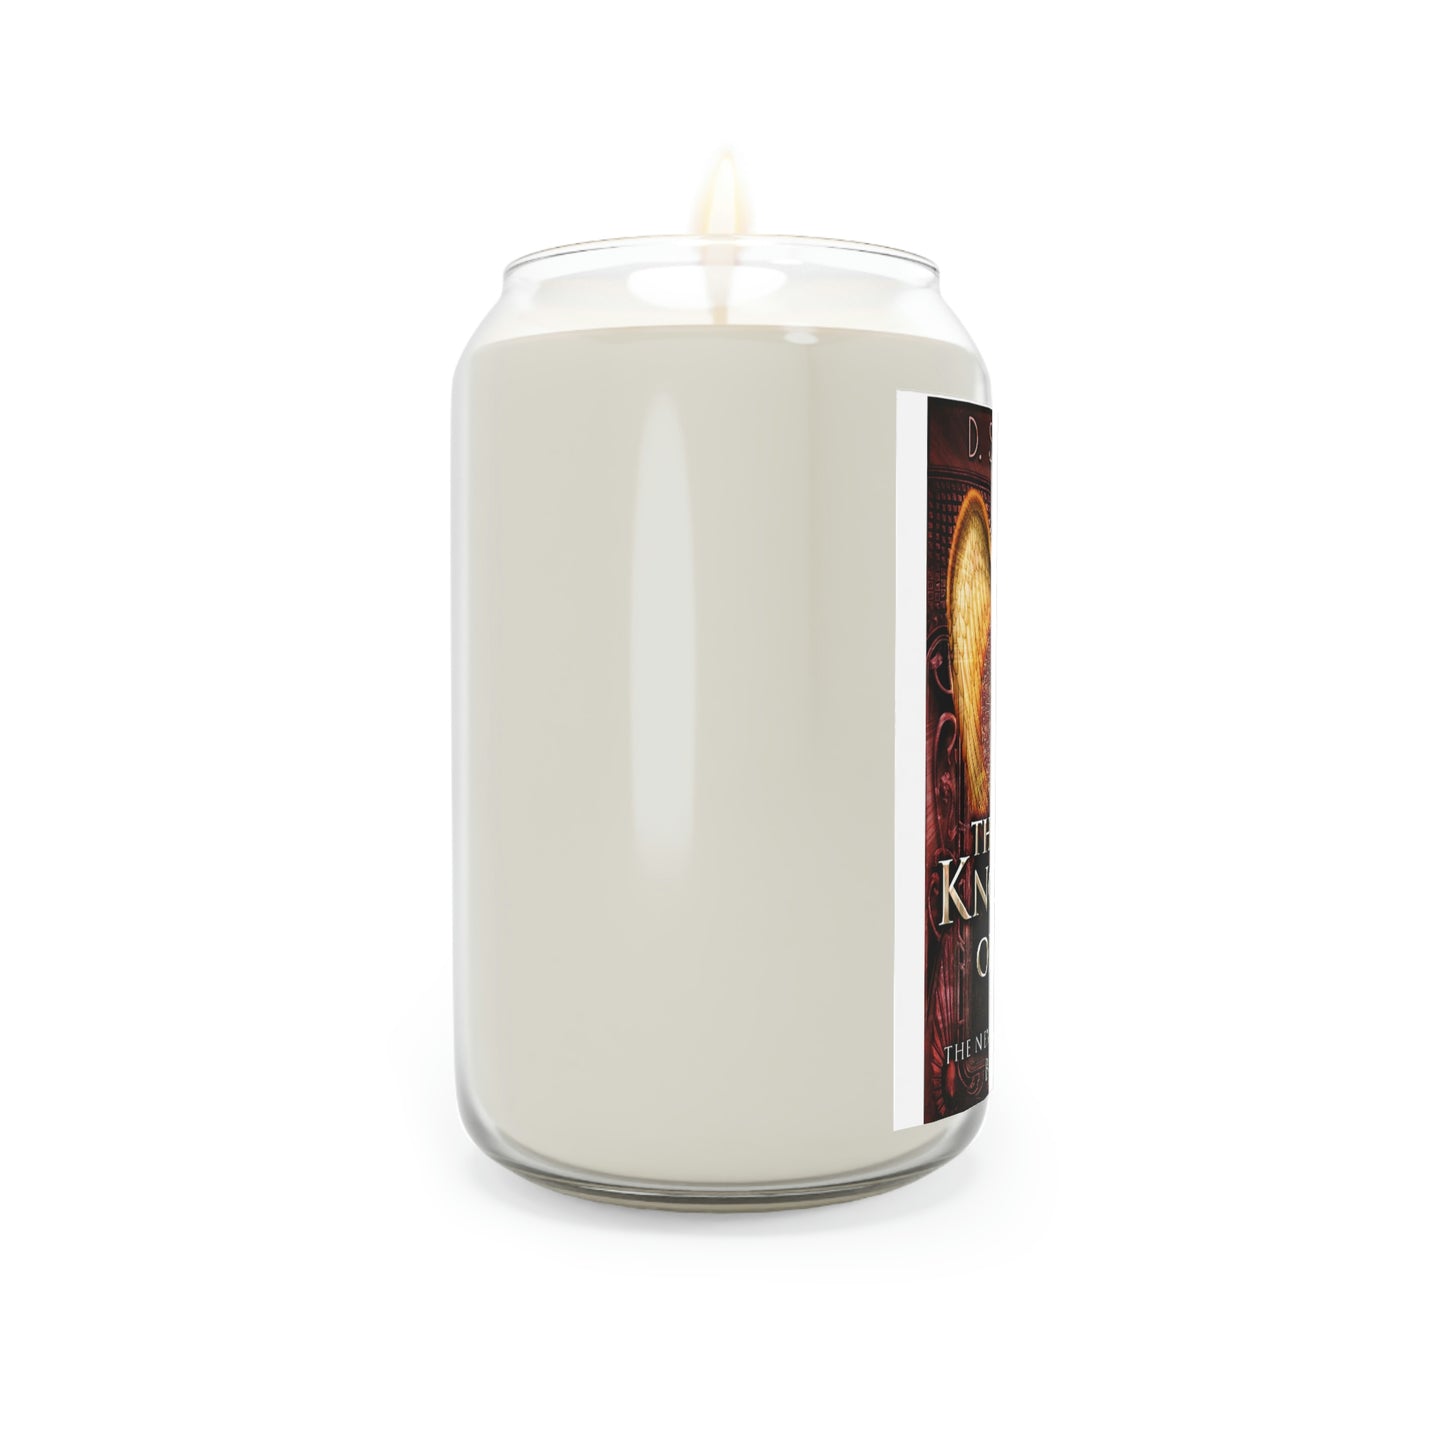 The Knowledge of Love - Scented Candle